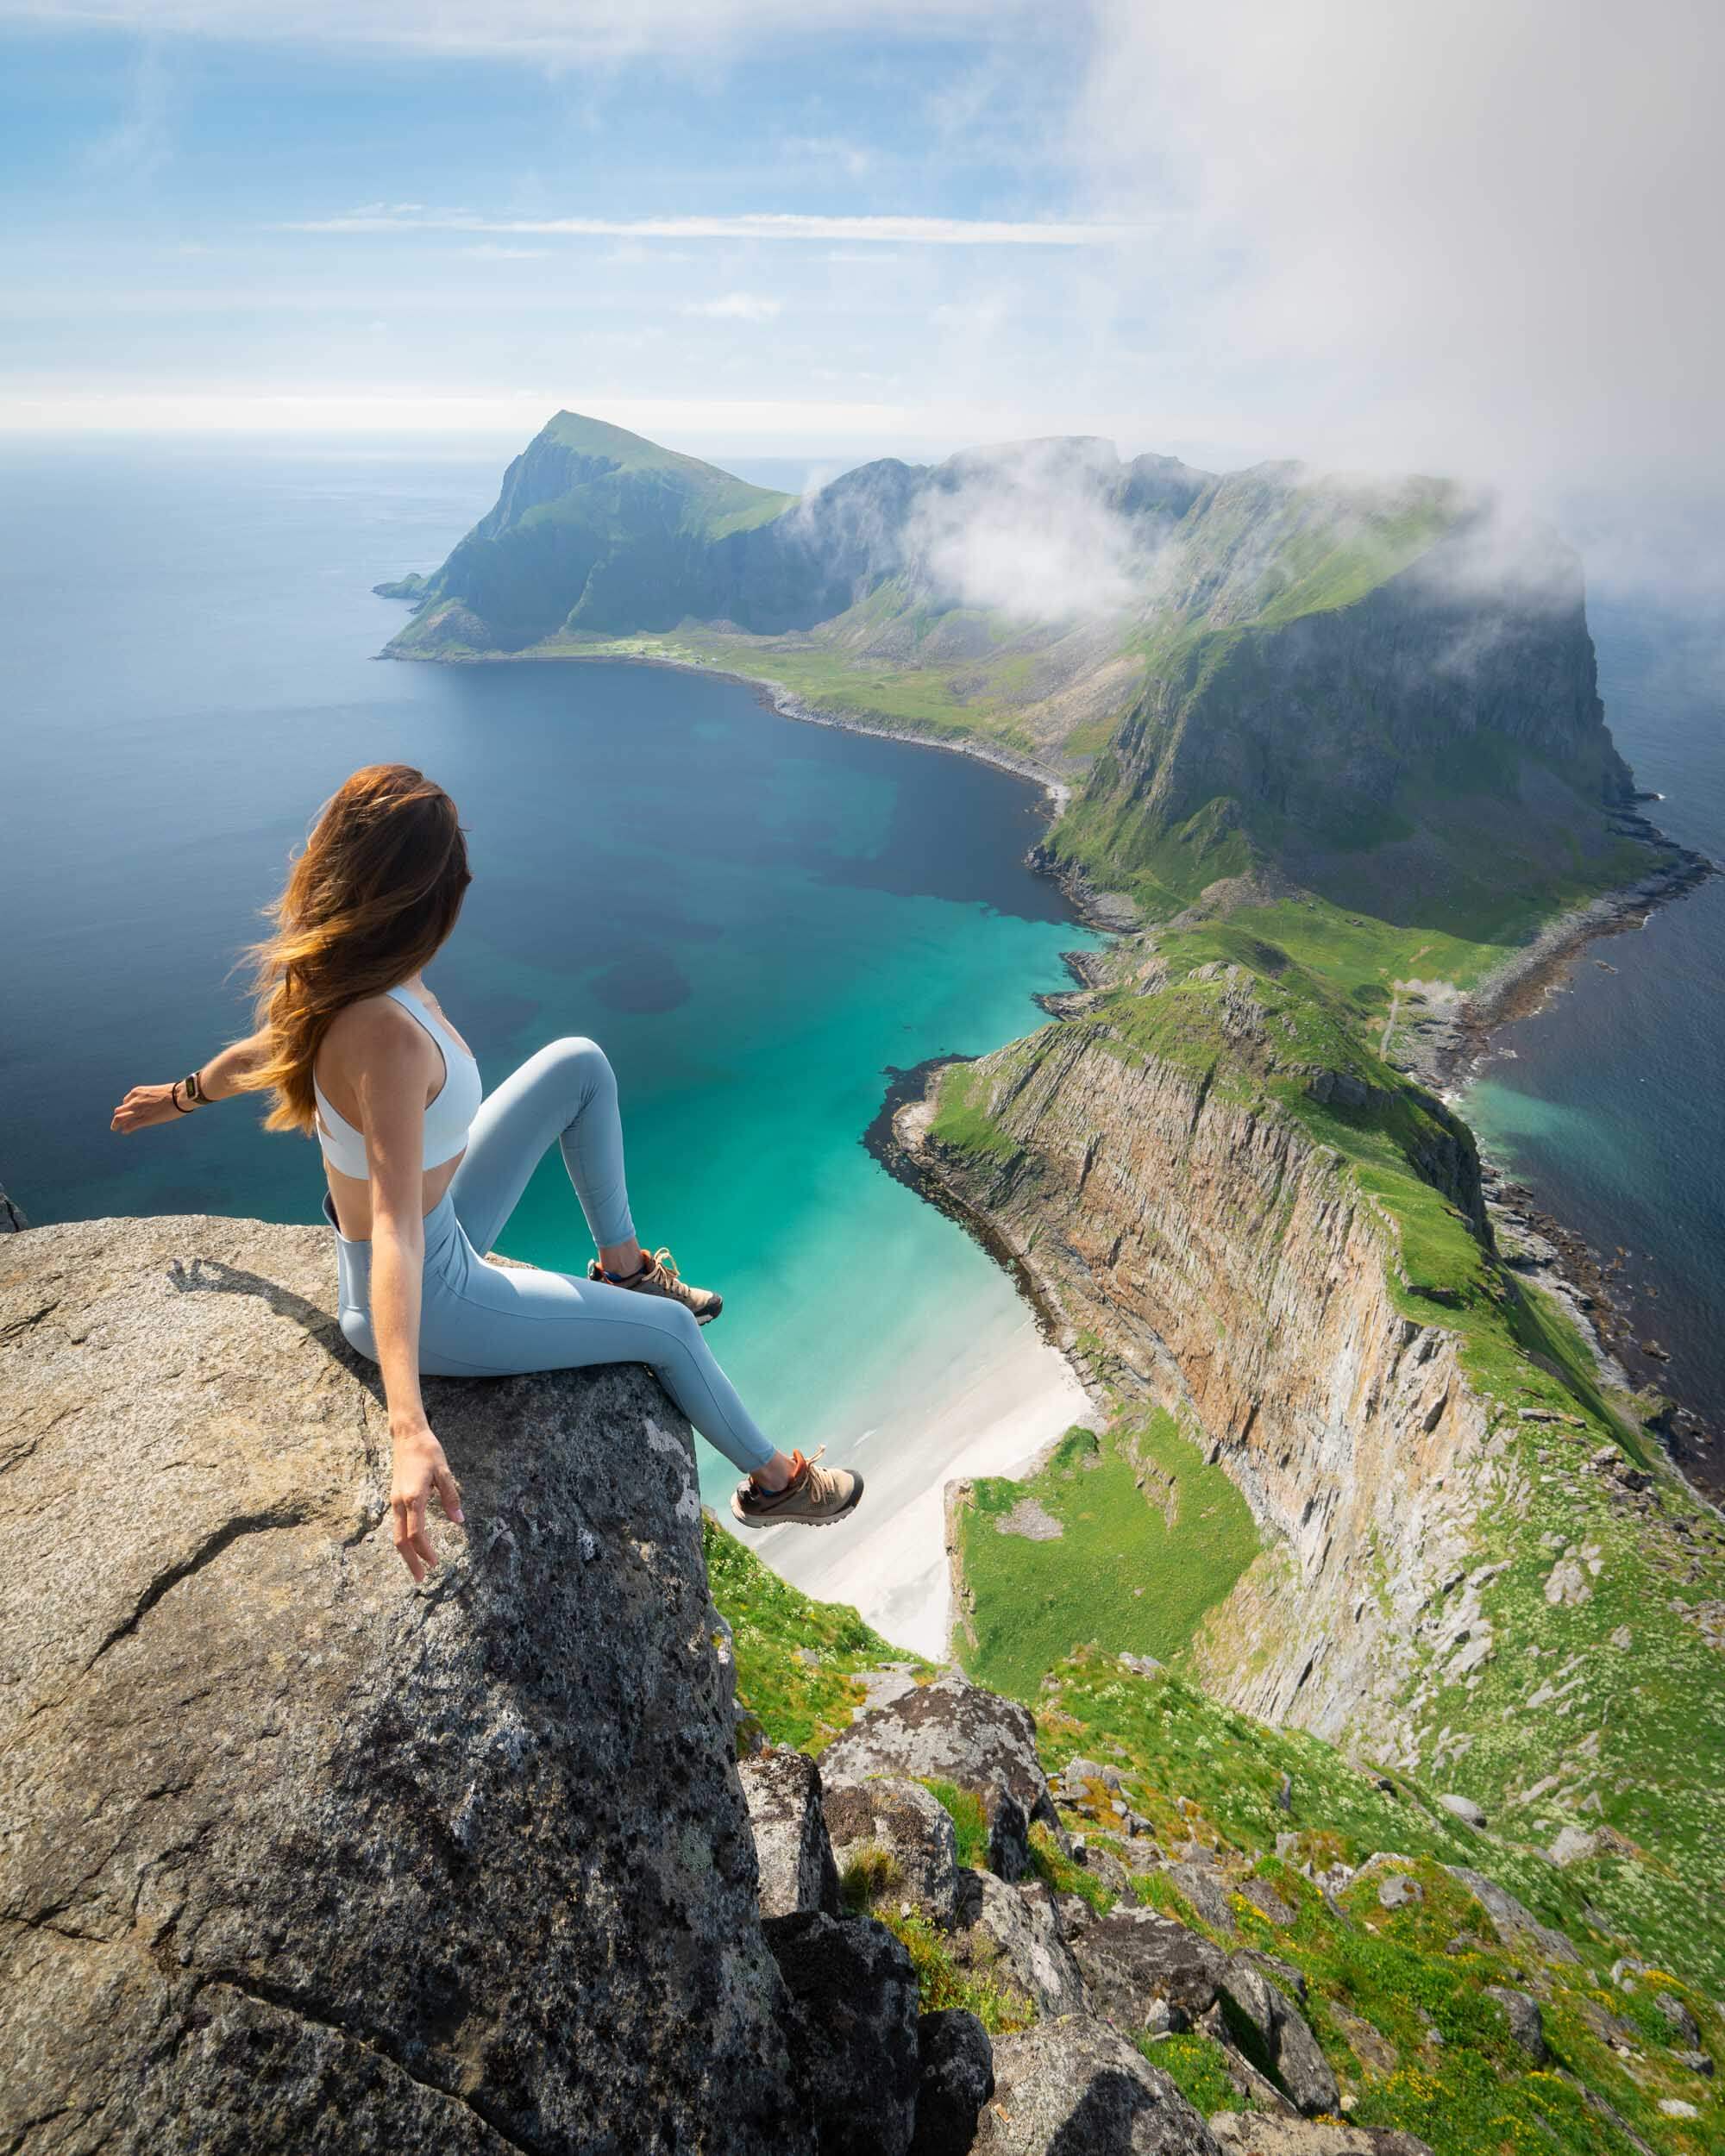 Jess wandering sitting on a rock with arms outstretched with green mountains and blue water on the haen hike on Værøy island in norway